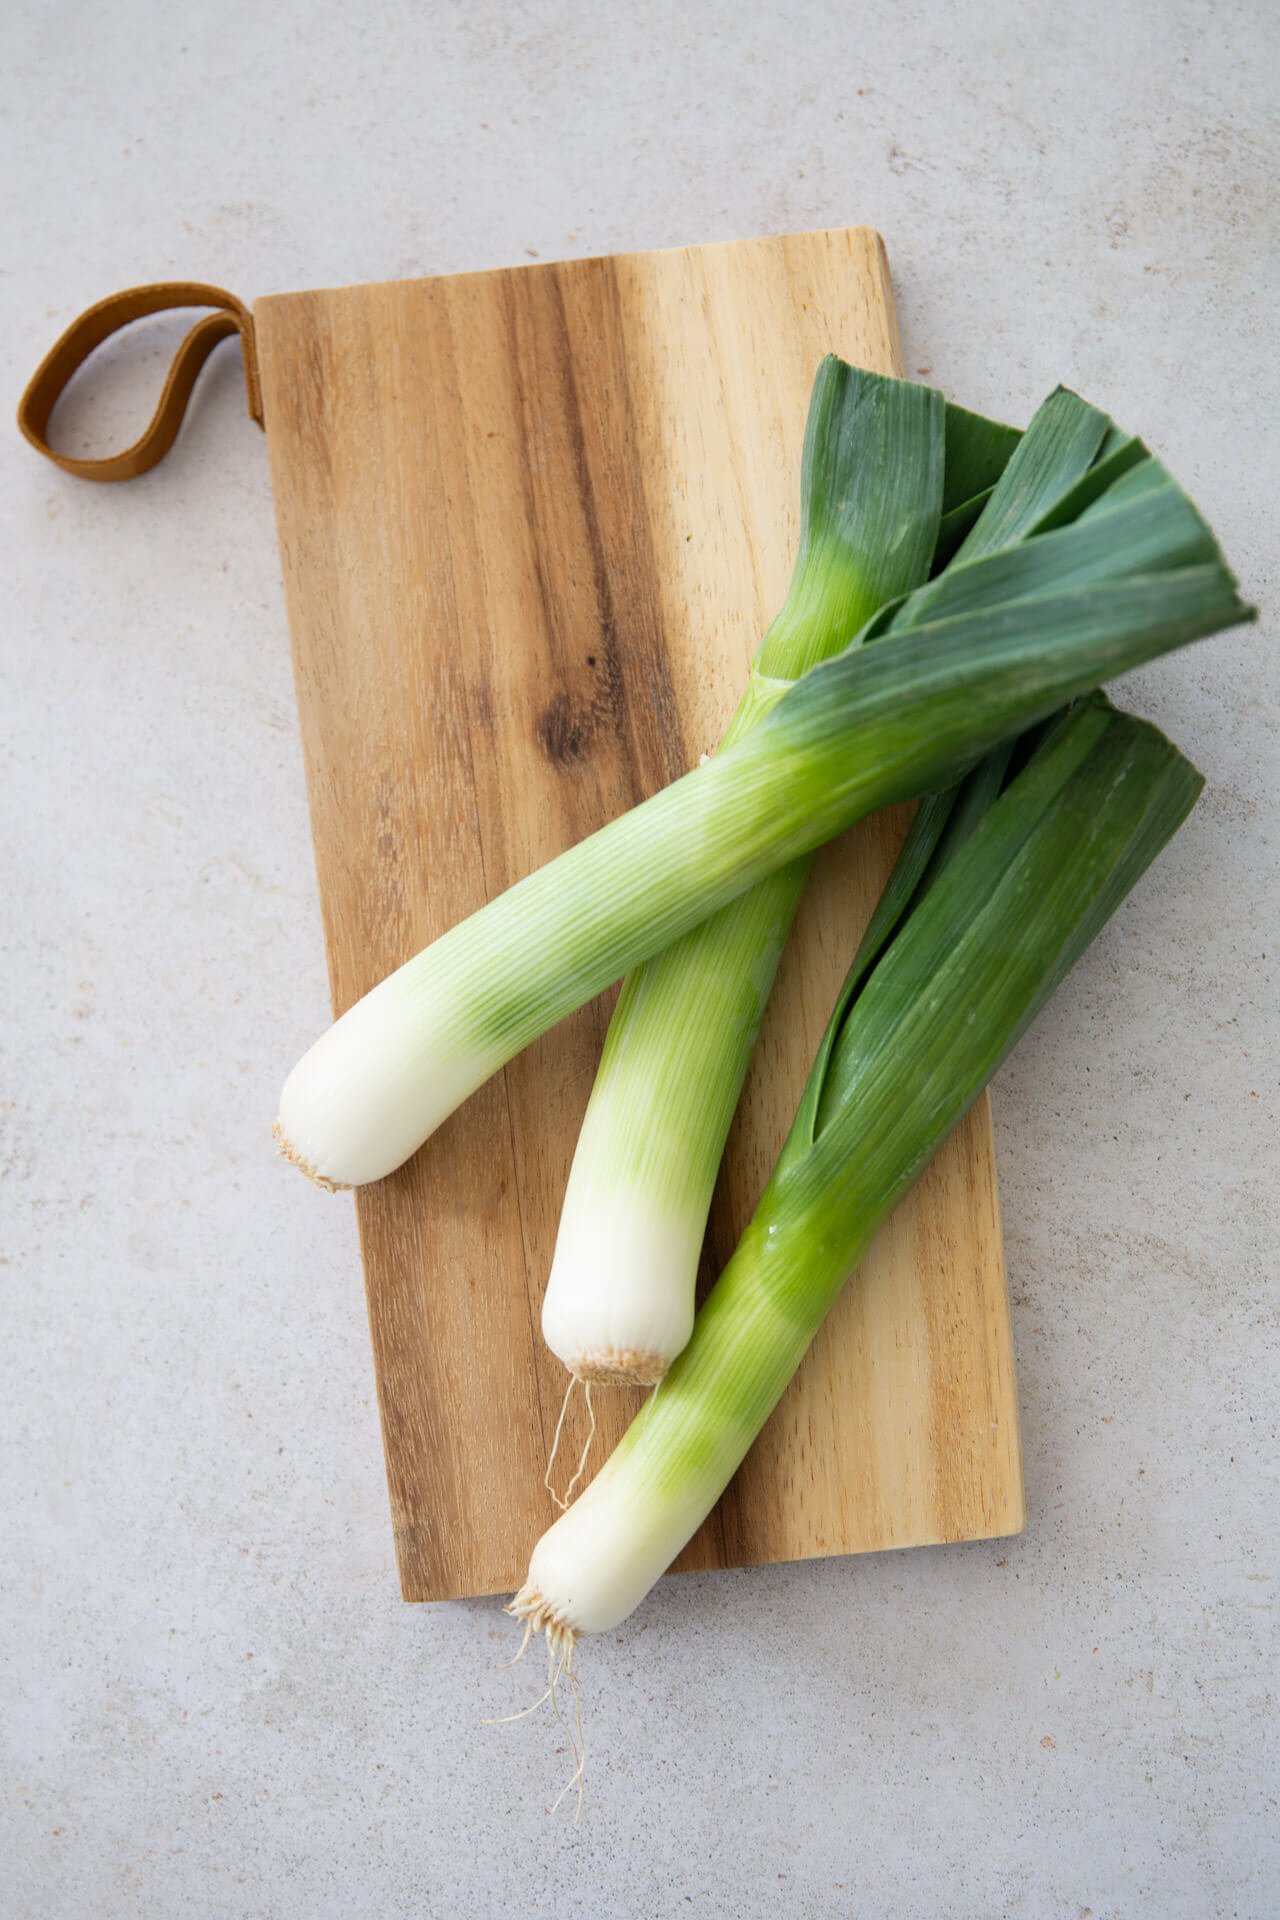 Leeks on a wooden cutting board, All About Leeks.